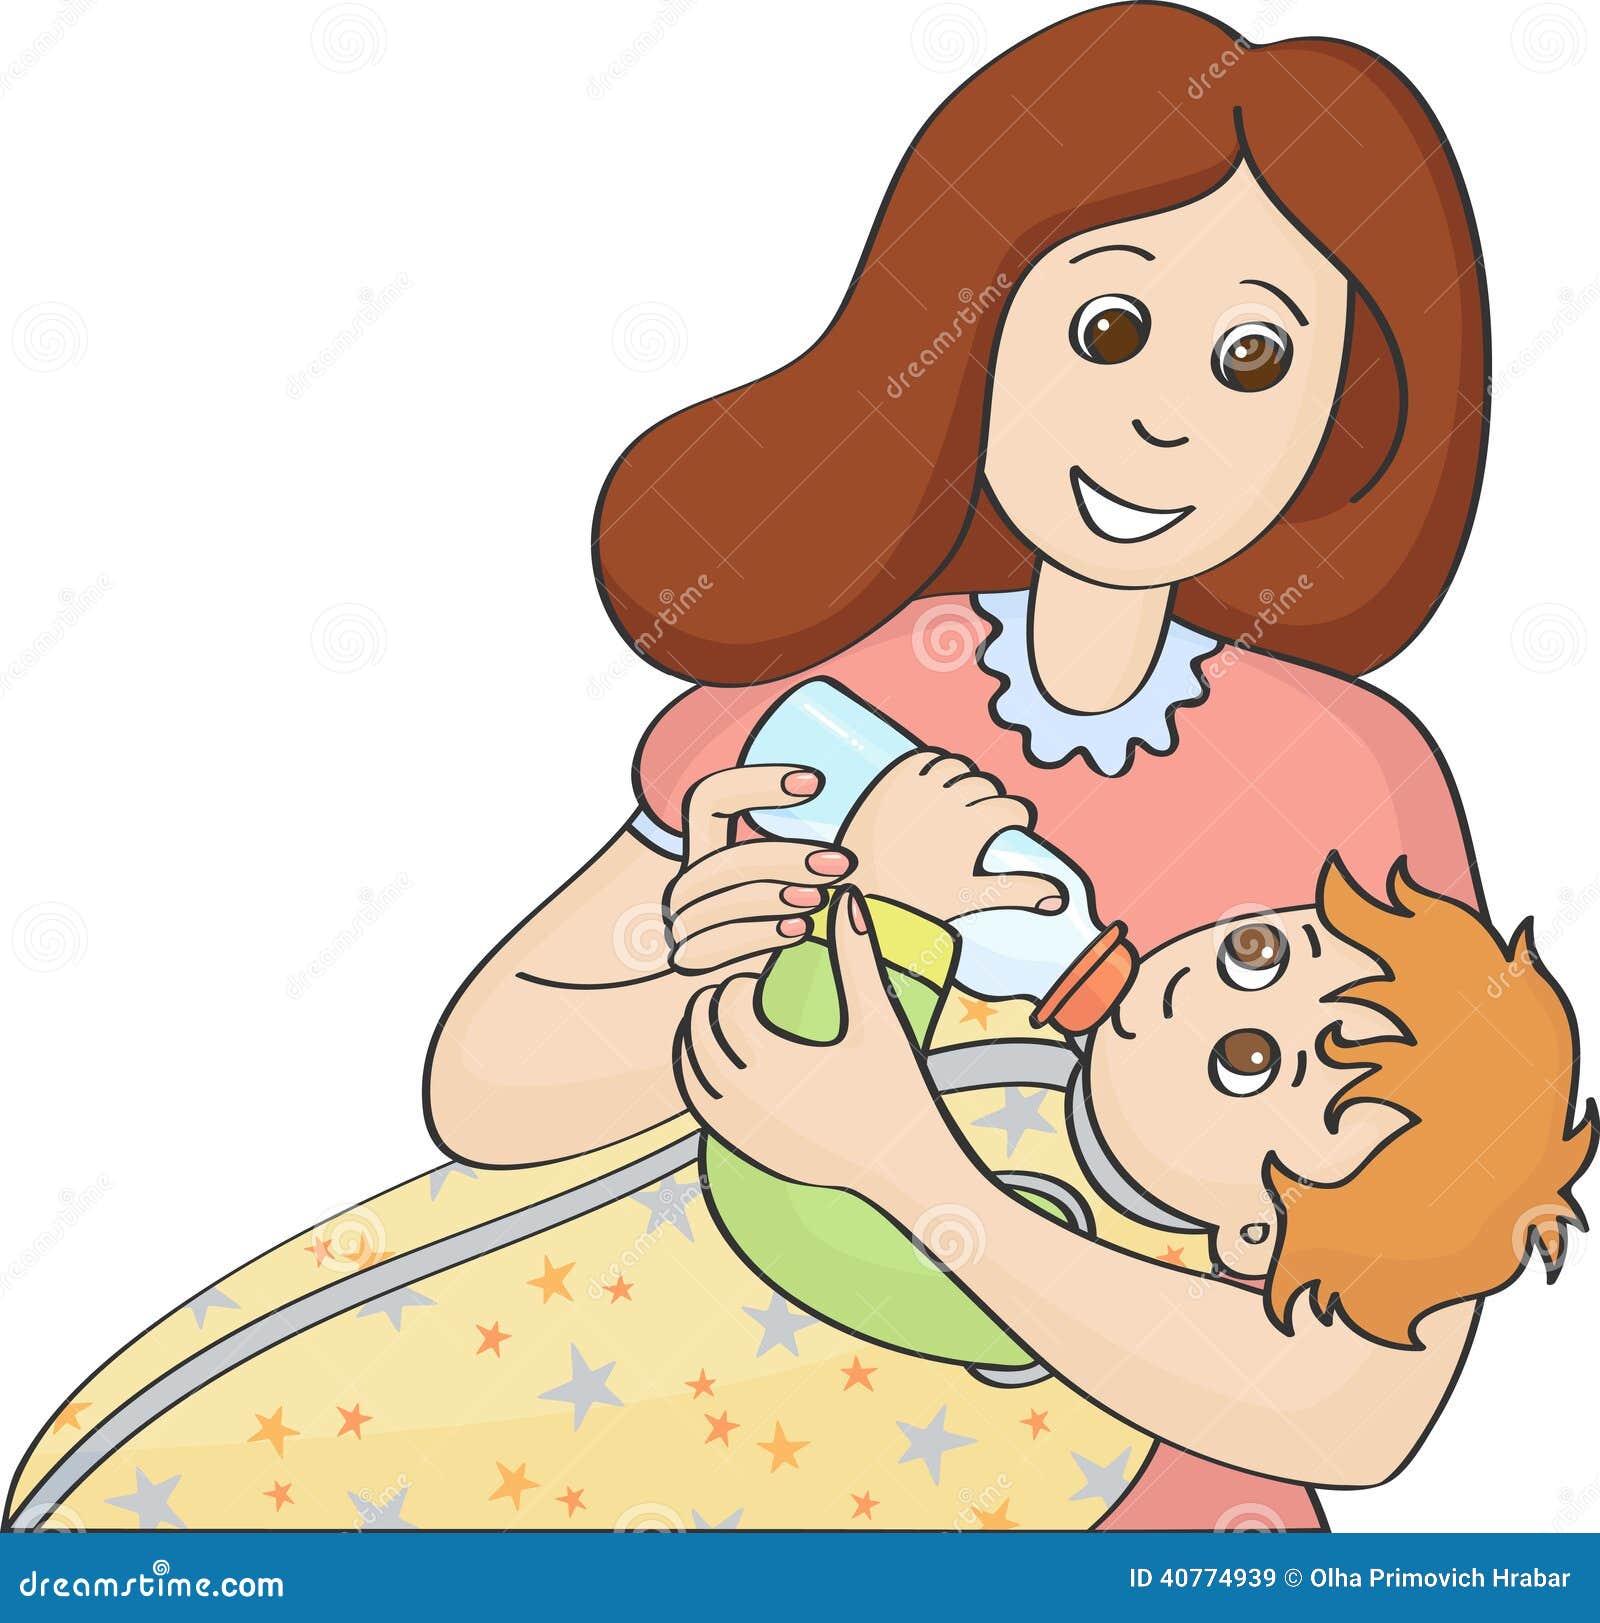 baby eating clipart - photo #34